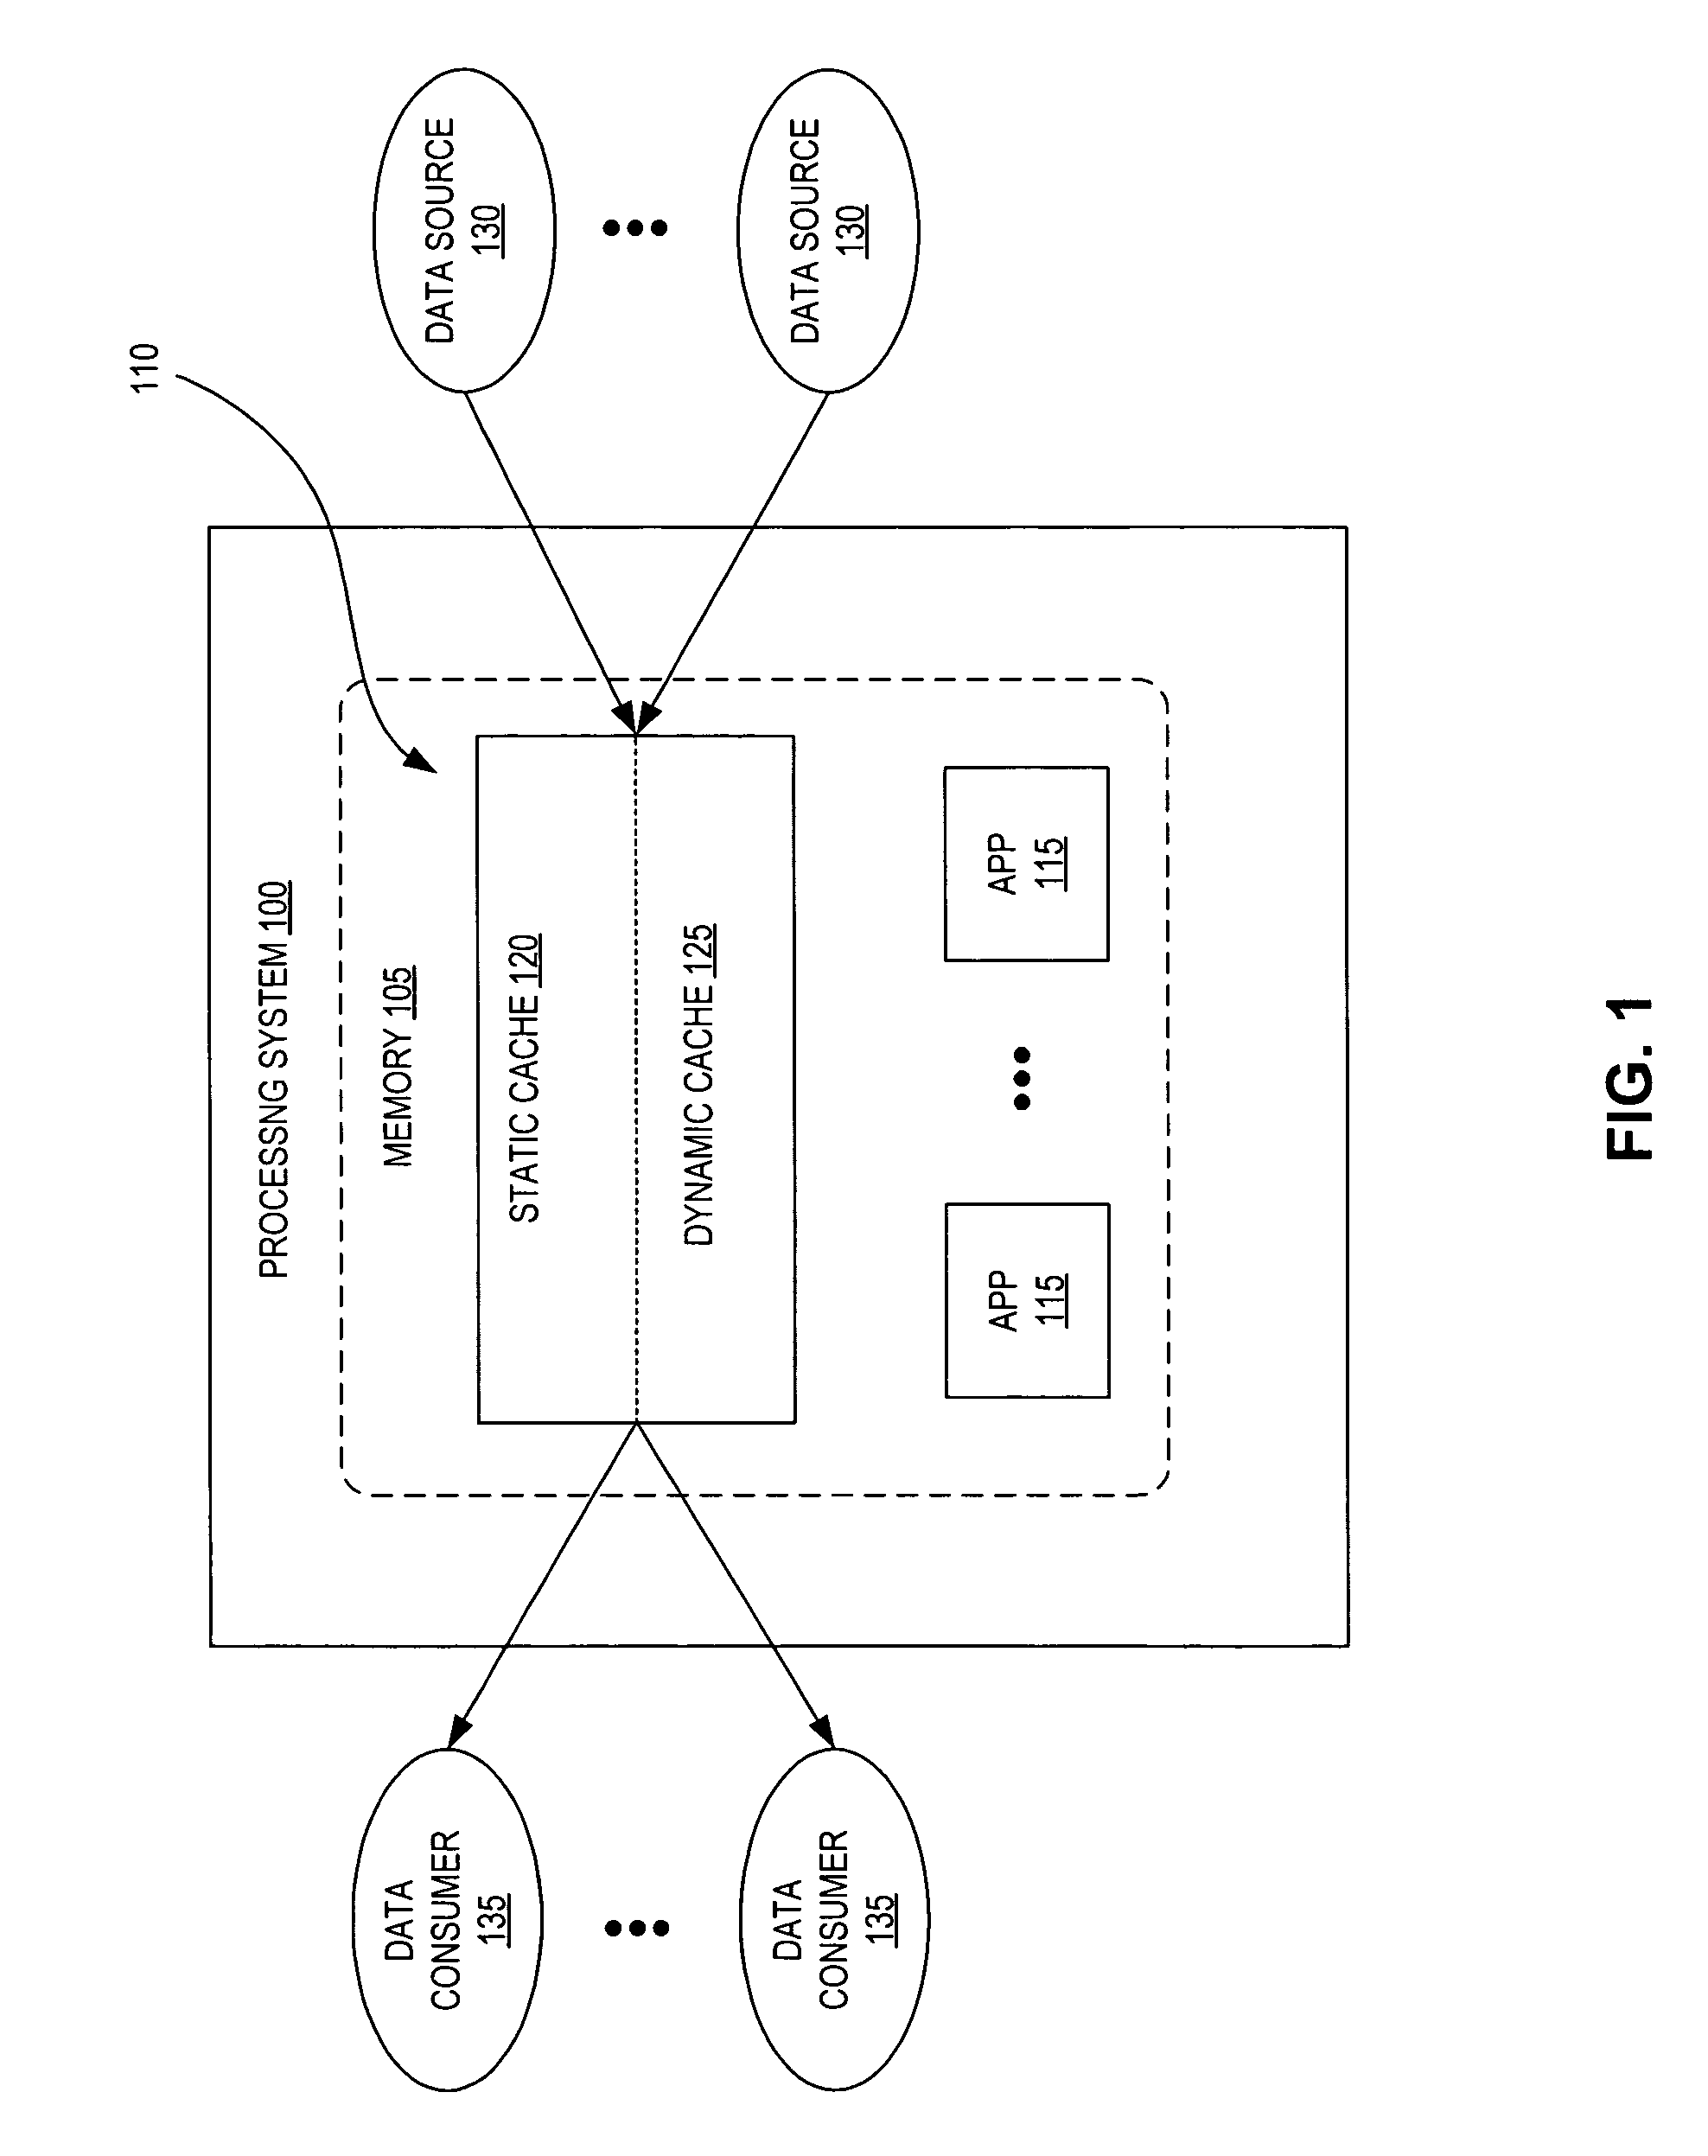 Hybrid-cache having static and dynamic portions